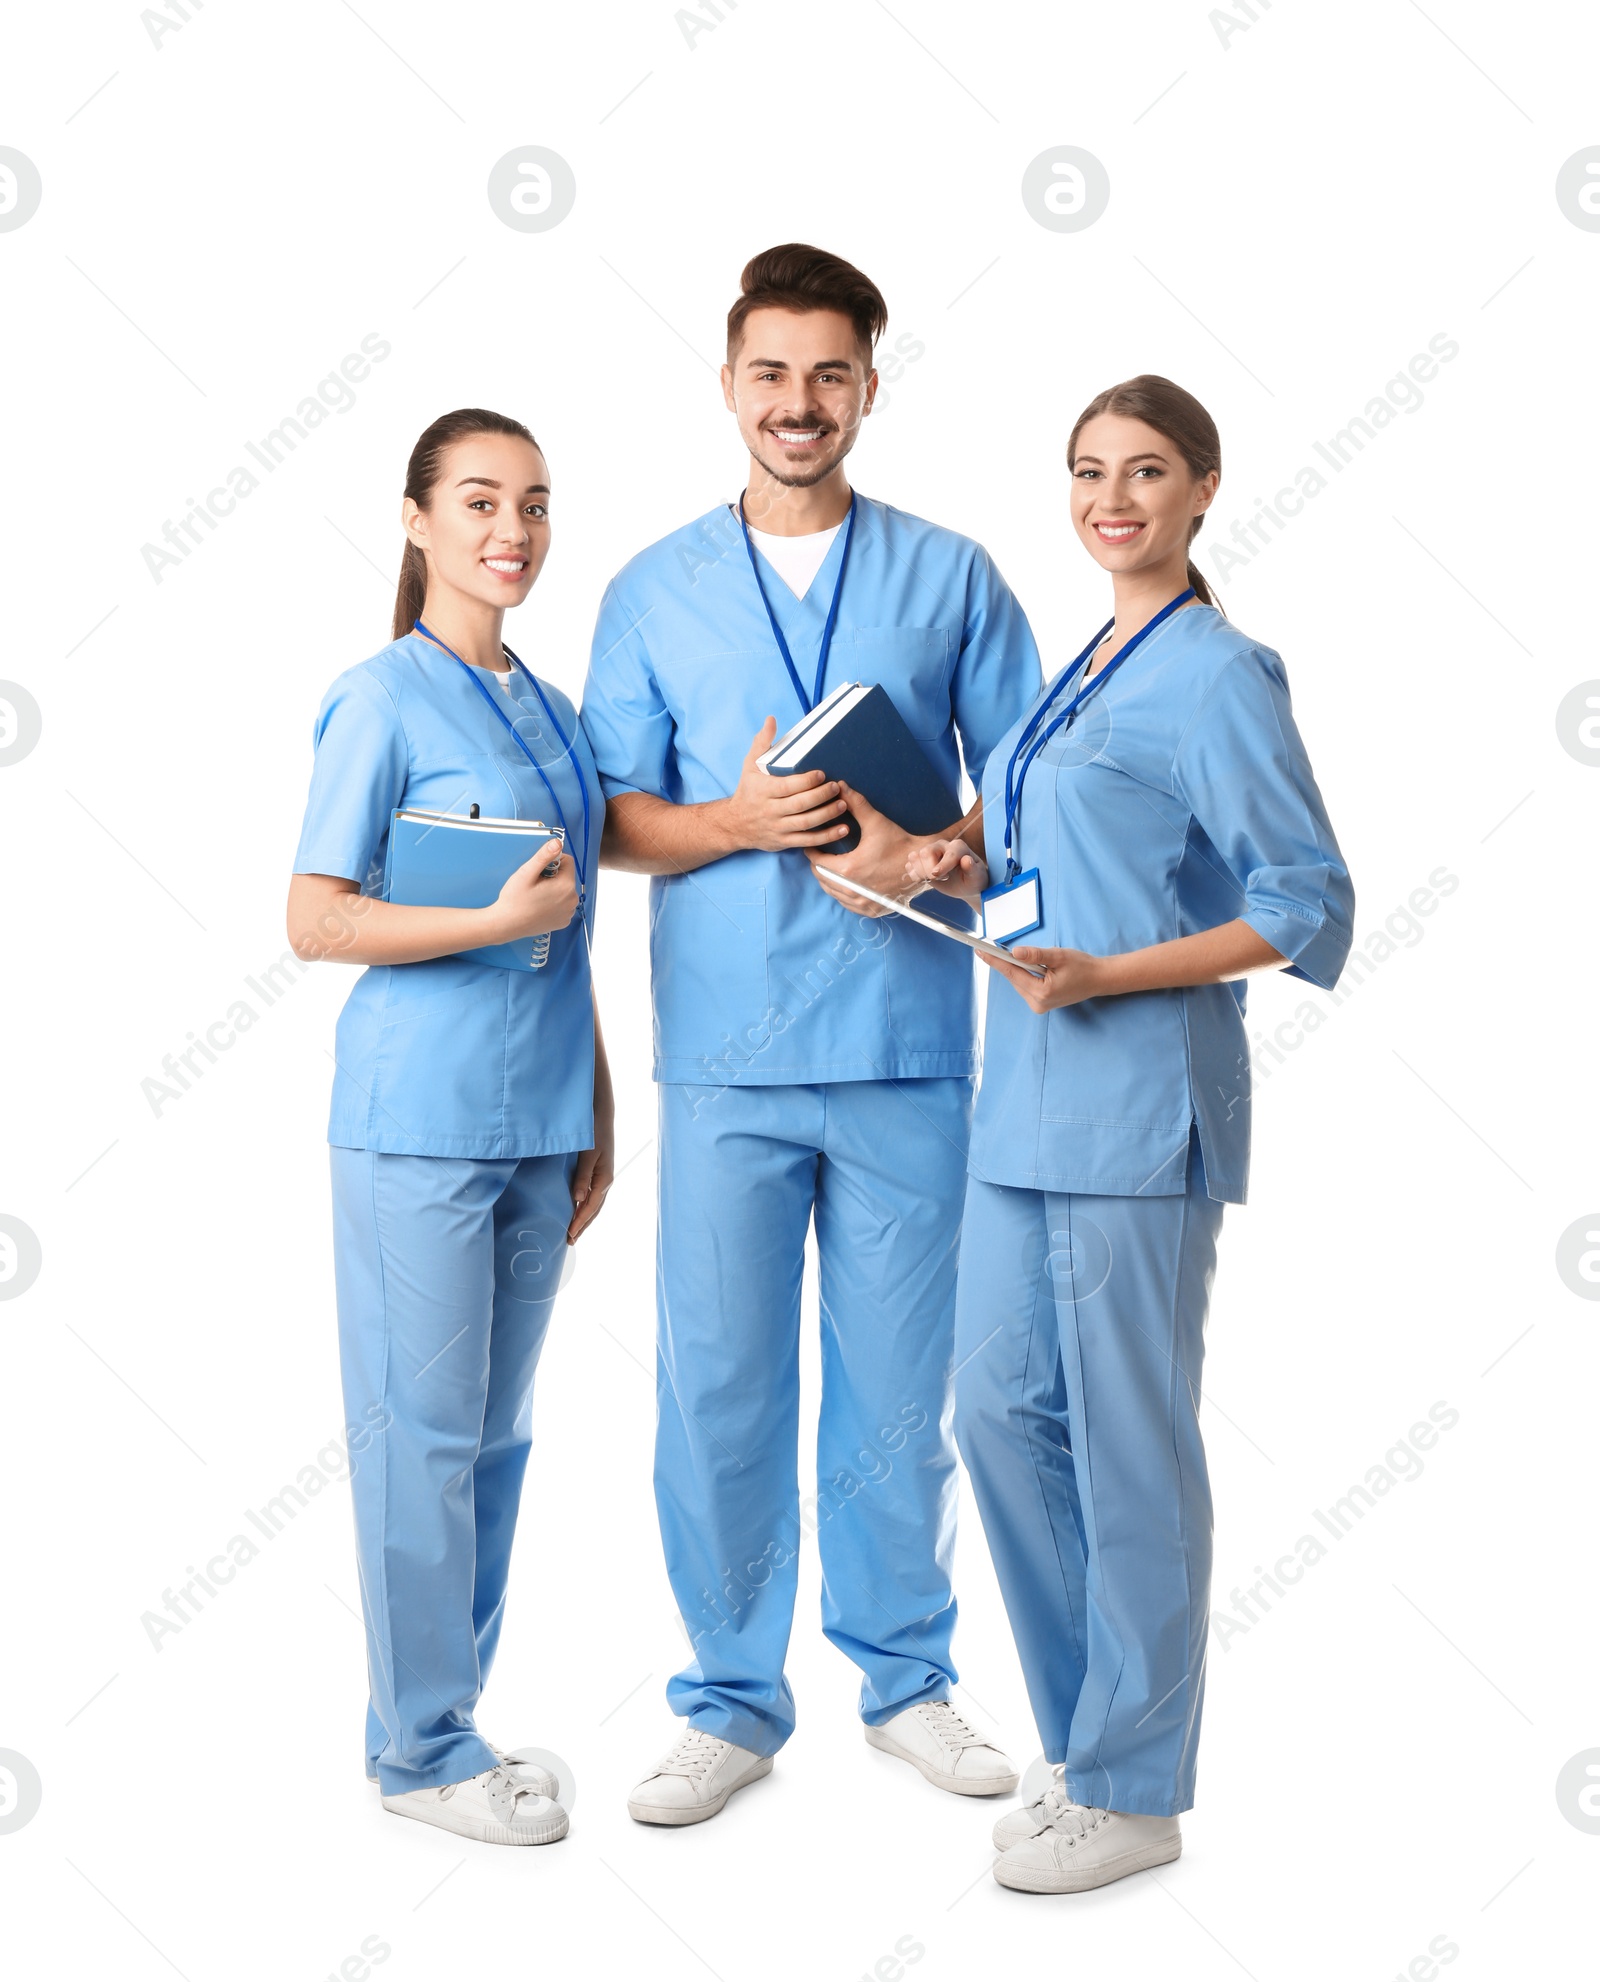 Photo of Group of young medical students on white background